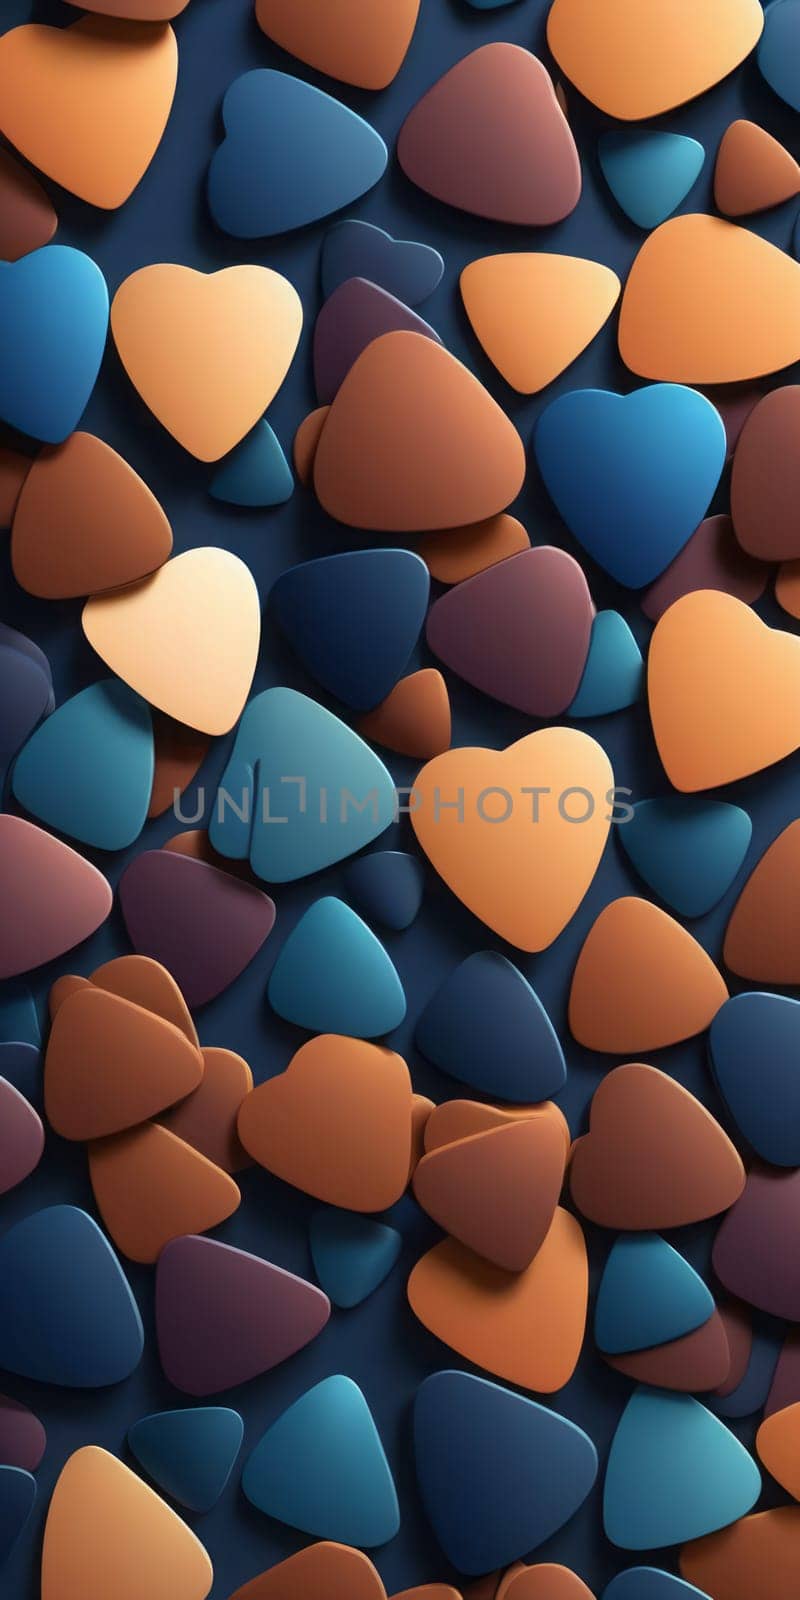 Plectrum Shapes in Navy and Chocolate by nkotlyar